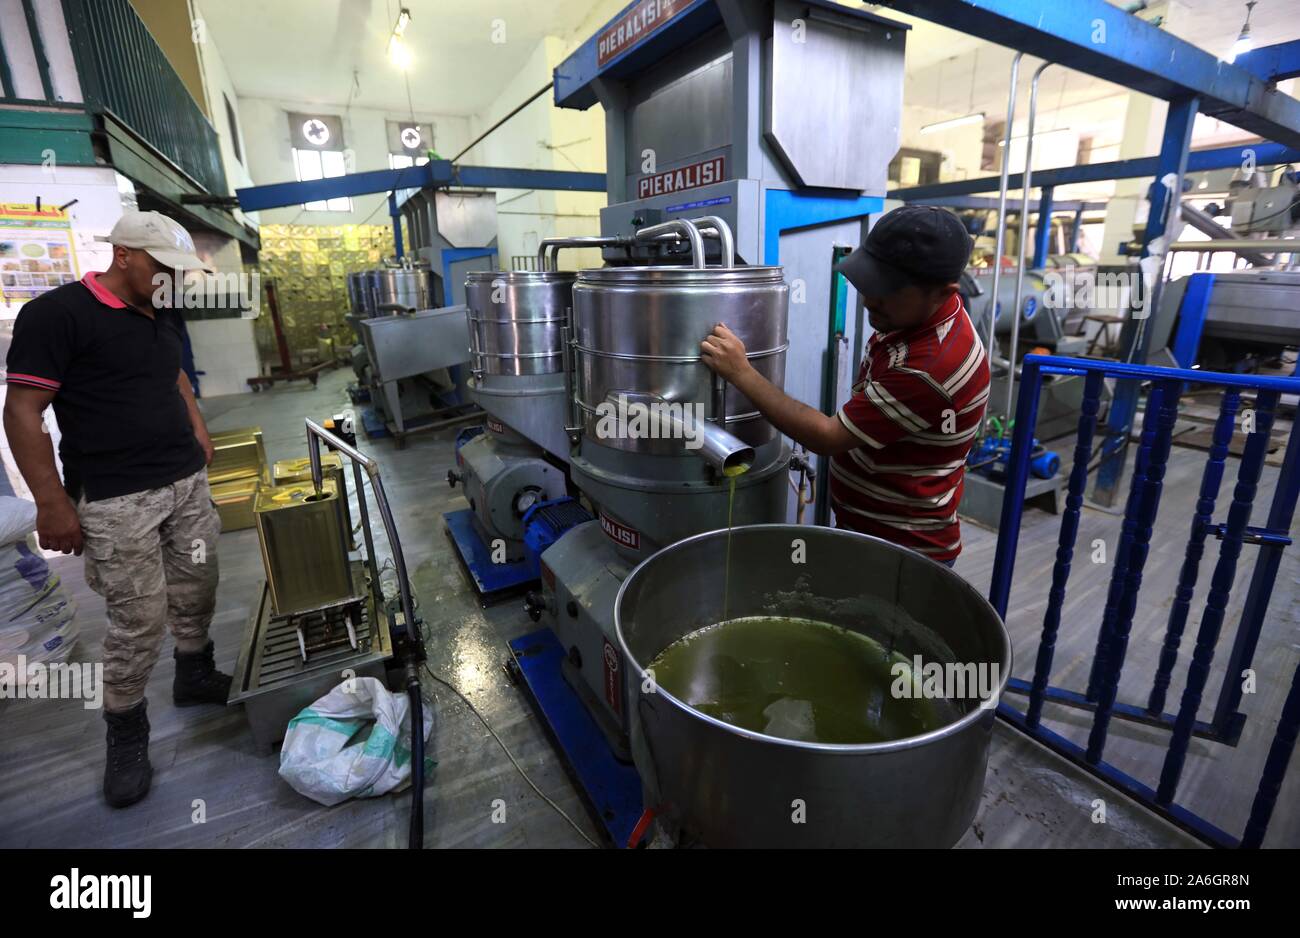 (191026) -- AJLOUN (JORDAN), Oct. 26, 2019 (Xinhua) -- Workers are seen at an olive oil processing factory in Ajloun, north of Amman, Jordan, on Oct. 26, 2019. Jordan's Ministry of Agriculture has decided not to allow the export of olives this year in order to provide sufficient quantities for the local market in the olive season, which usually starts in mid-October, said the ministry in a statement. (Photo by Mohammad Abu Ghosh/Xinhua) Stock Photo